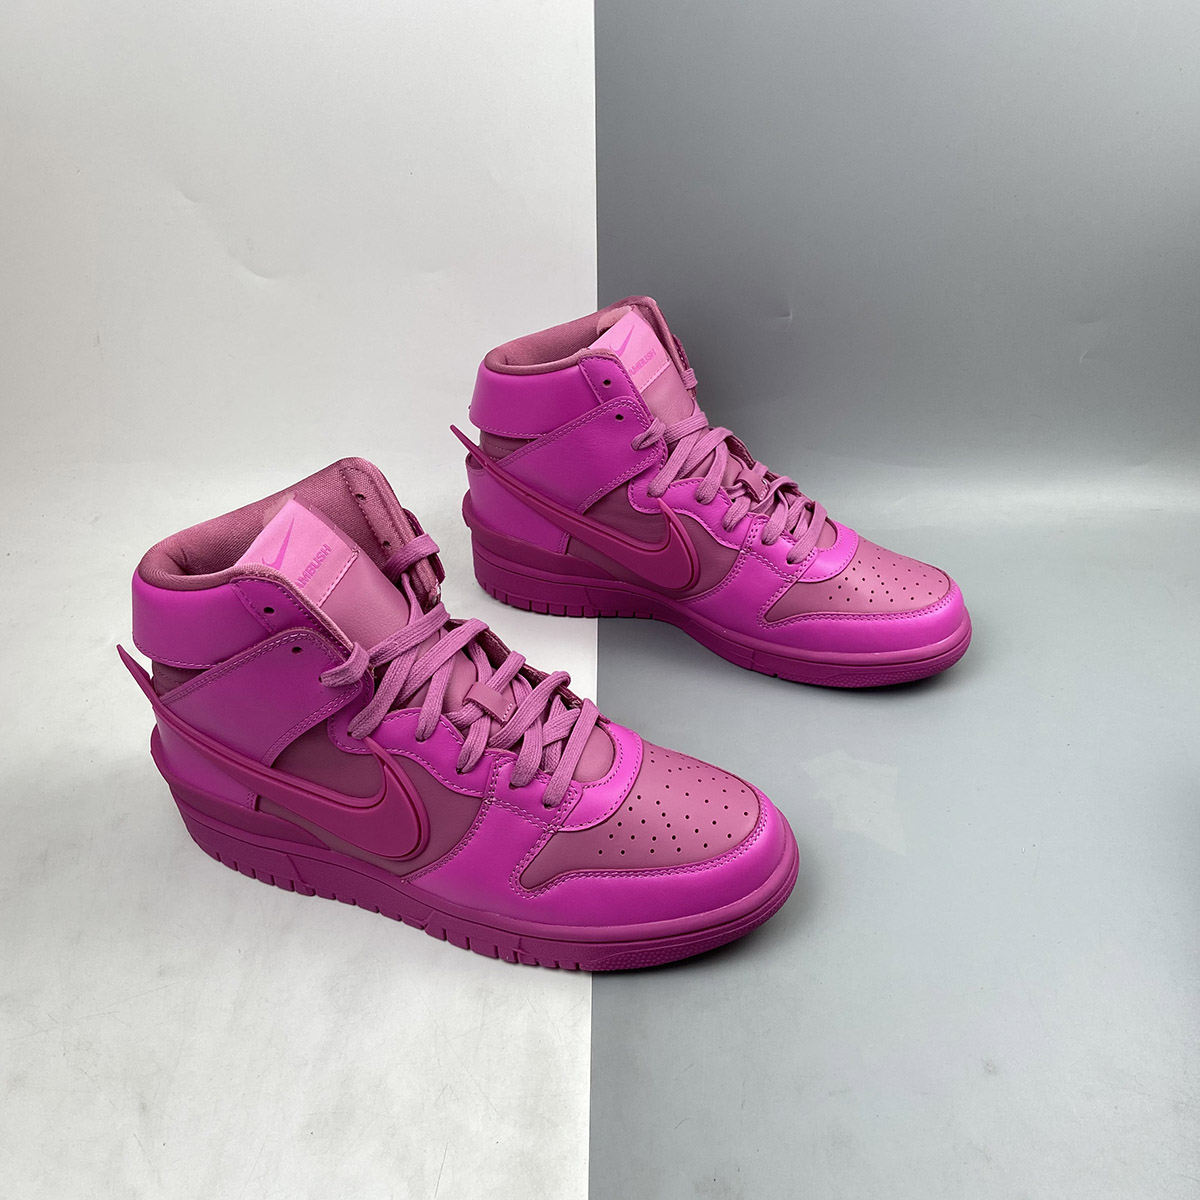 Ambush x Nike Dunk High Active Fuchsia/Lethal Pink For Sale – The Sole Line